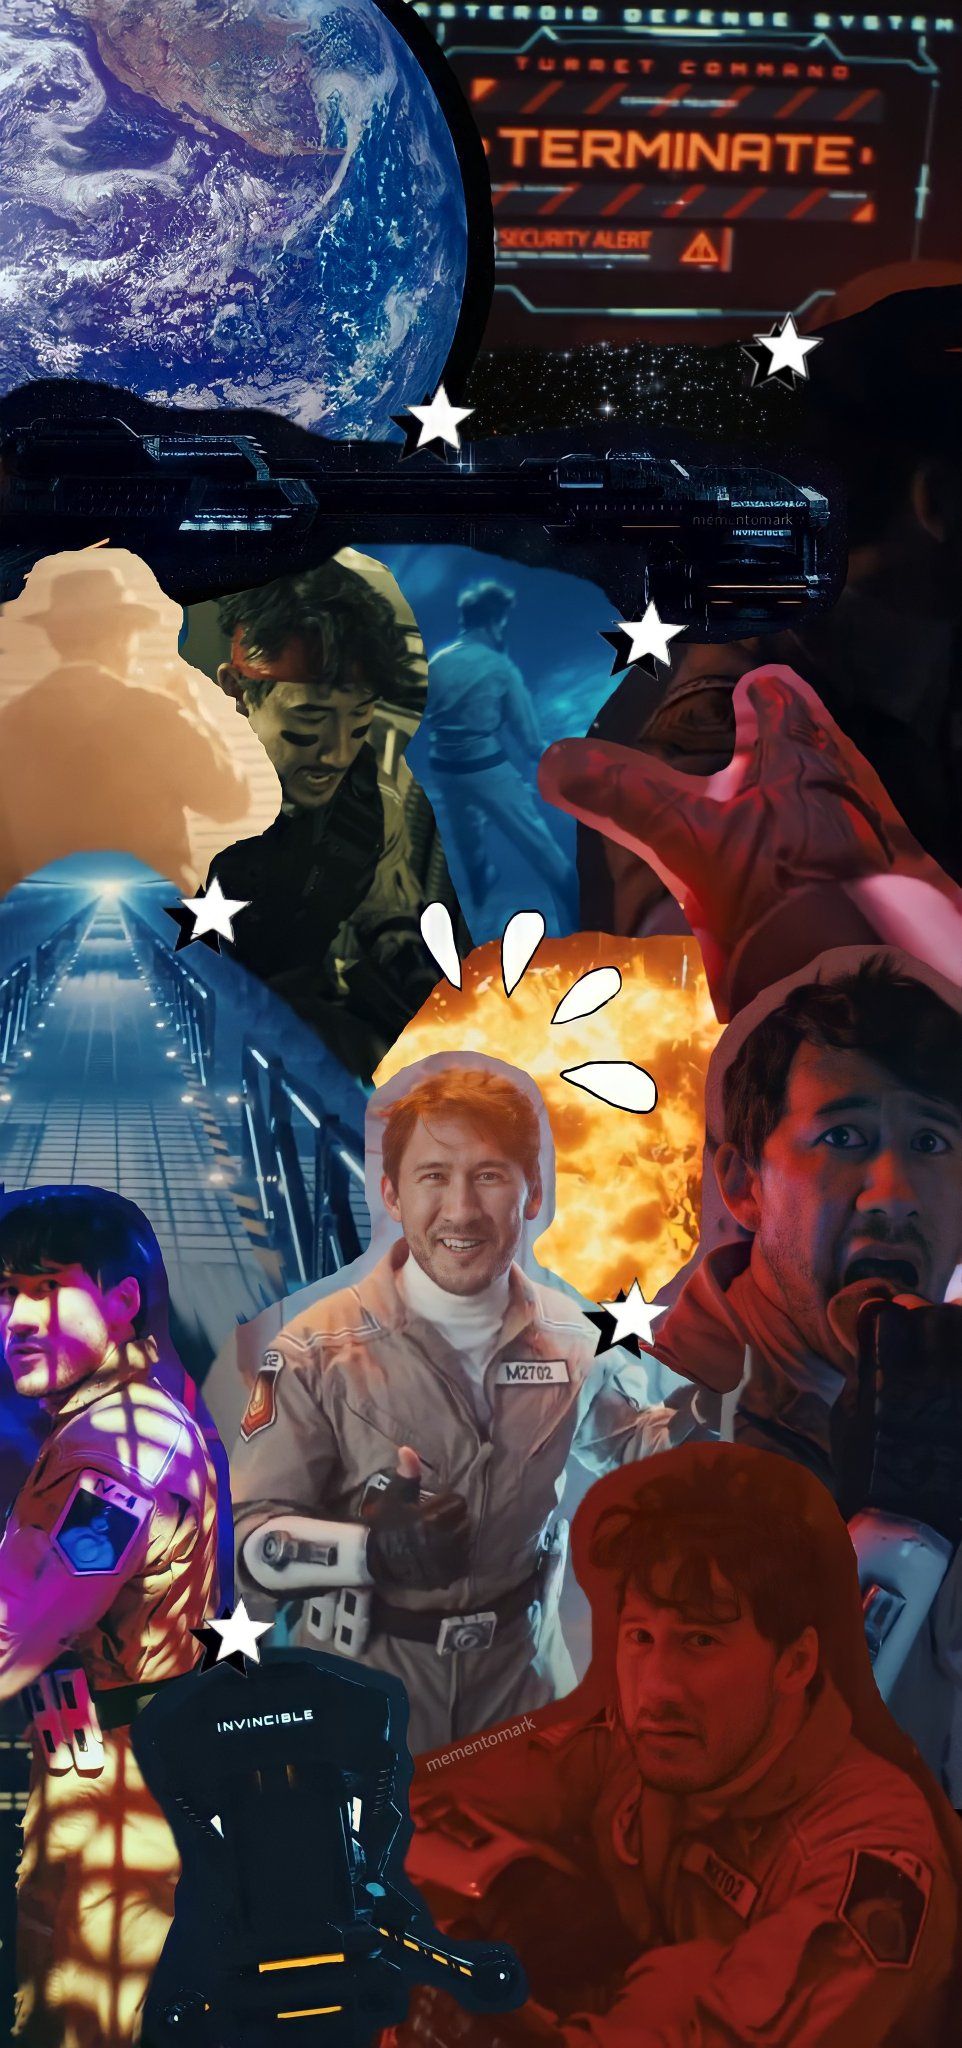 In Space With Markiplier collage wallpaper :)